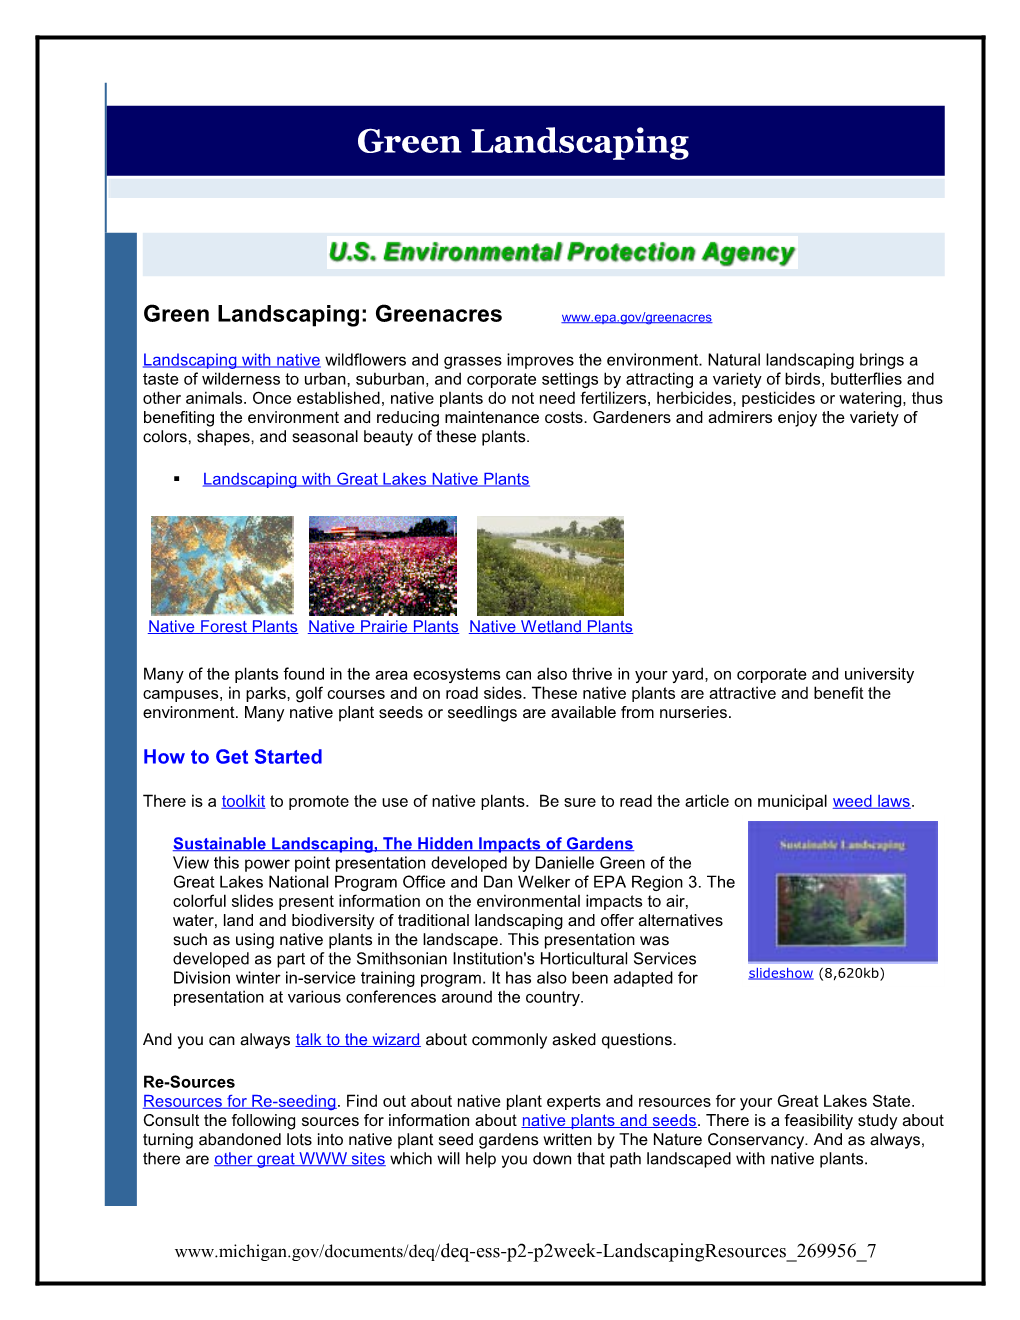 Landscaping Resources